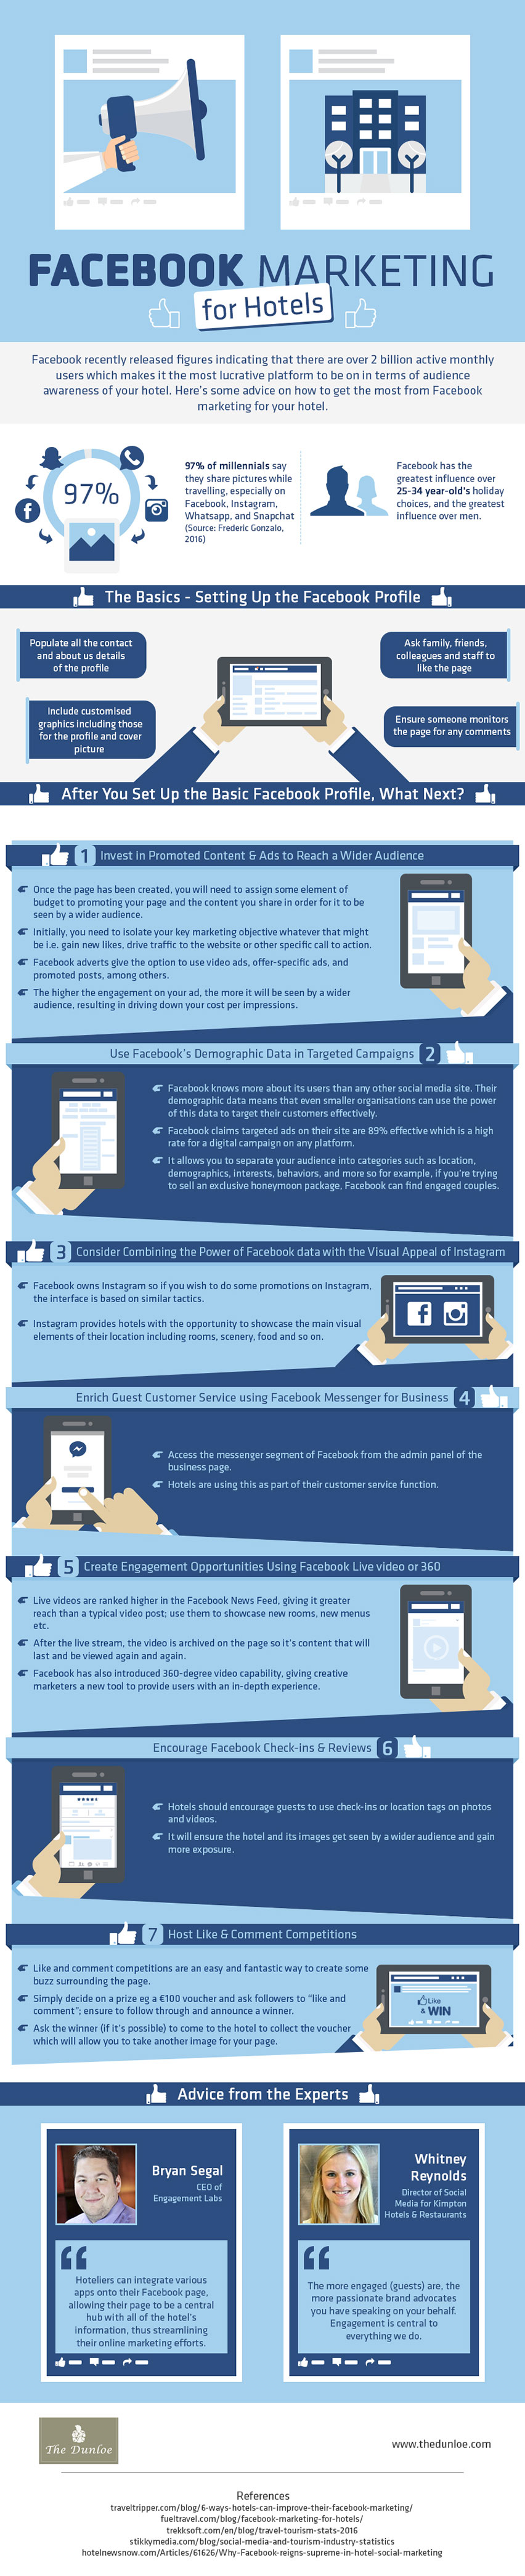 Facebook marketing for hotels, infographic.